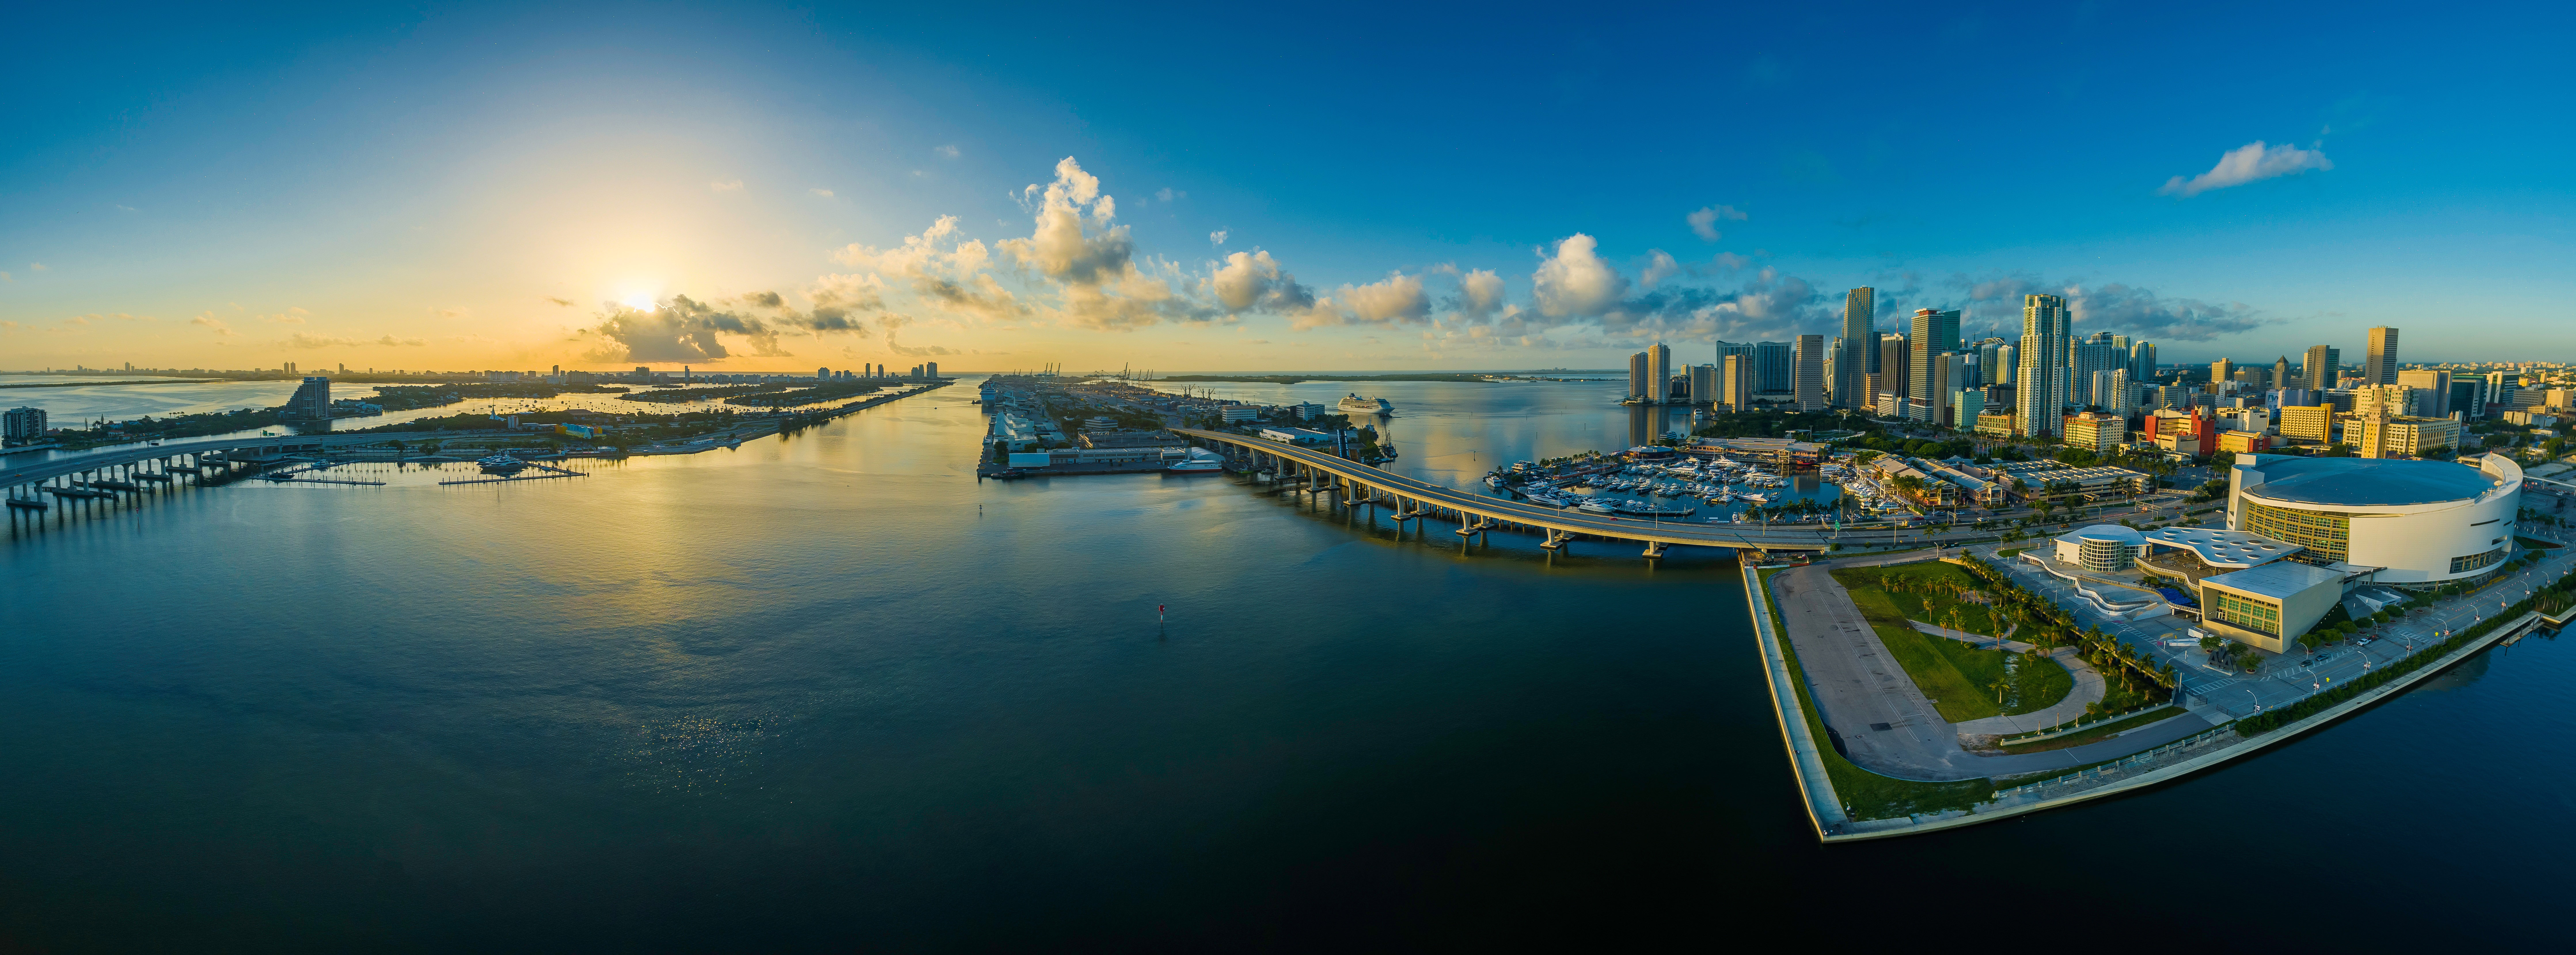 panorama of city and sky in miami florida